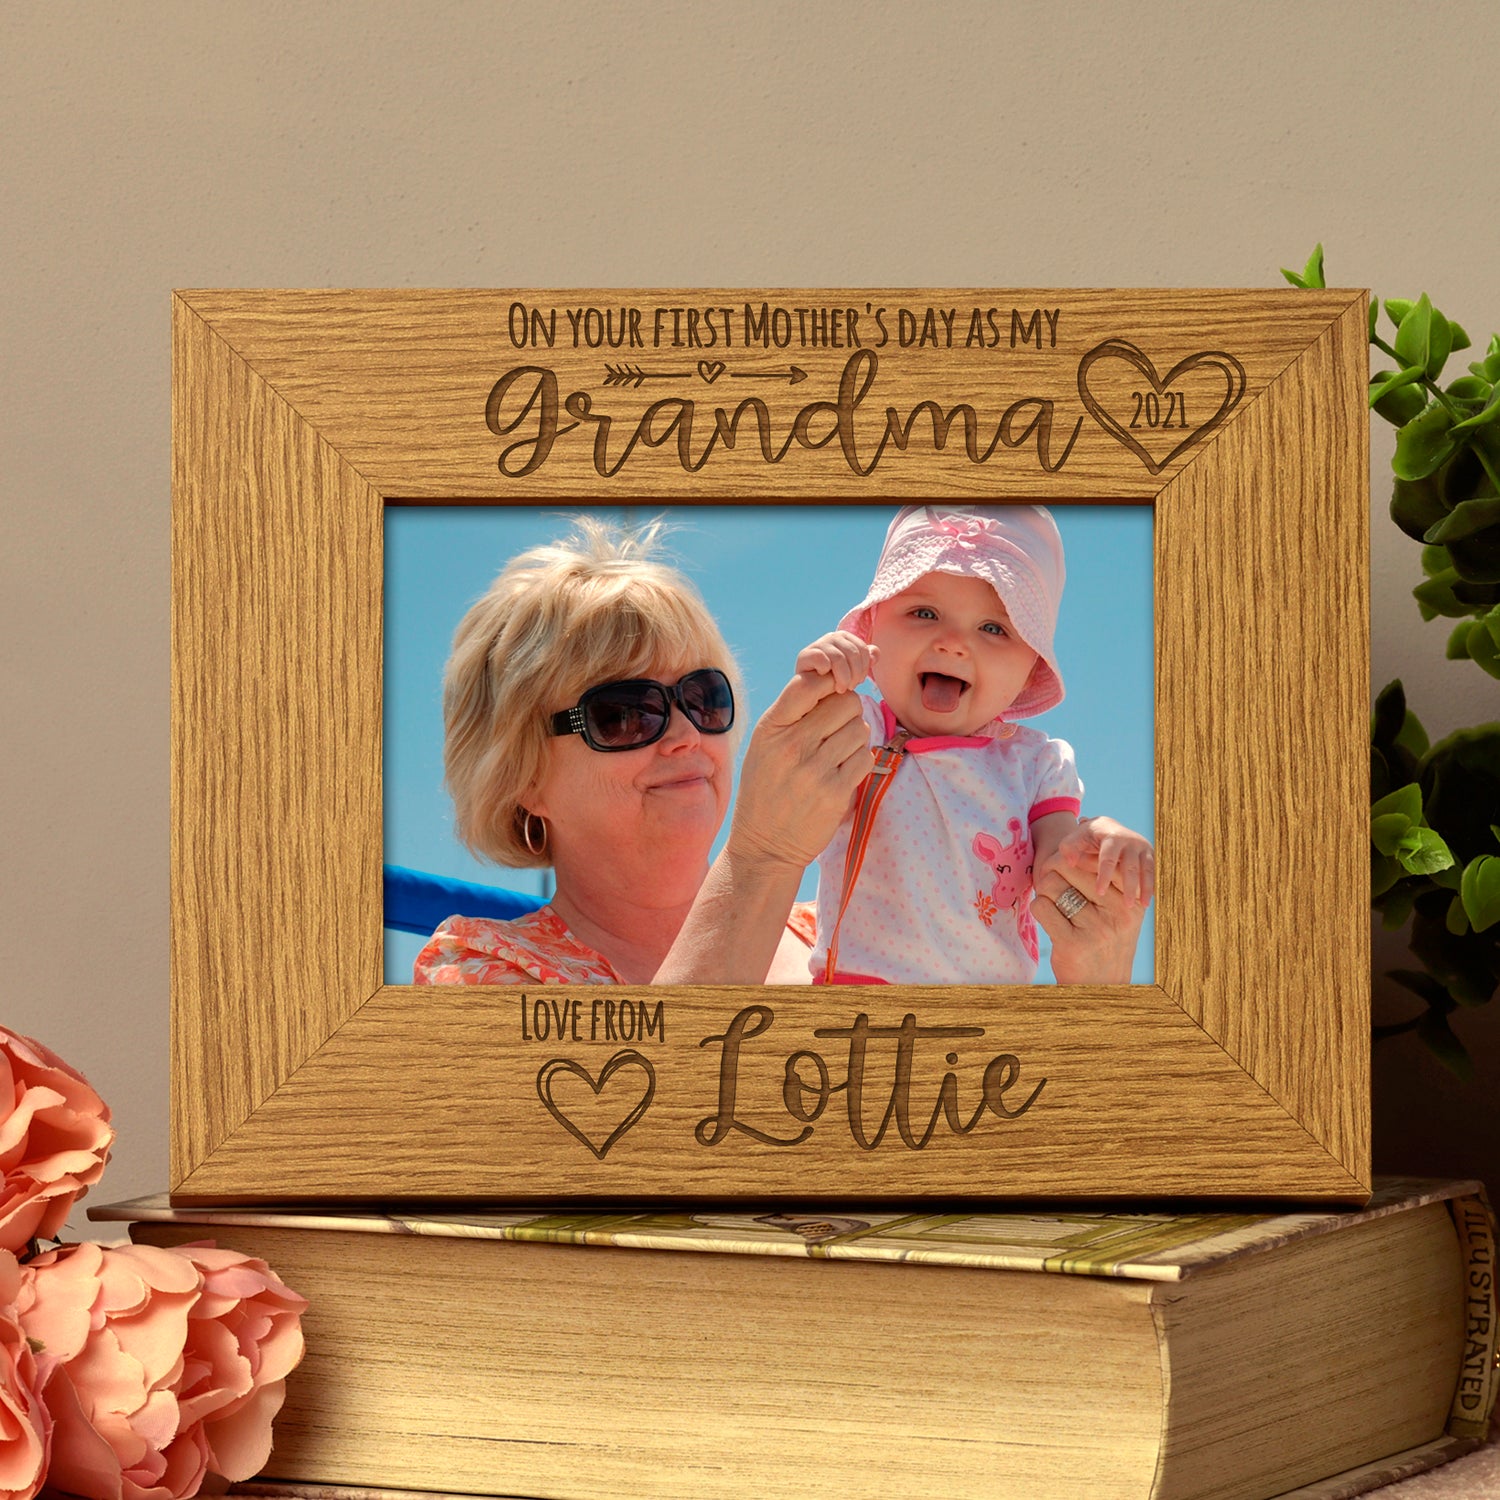 Personalised First Mothers Day as a Grandma Photo Frame Landscape - ukgiftstoreonline